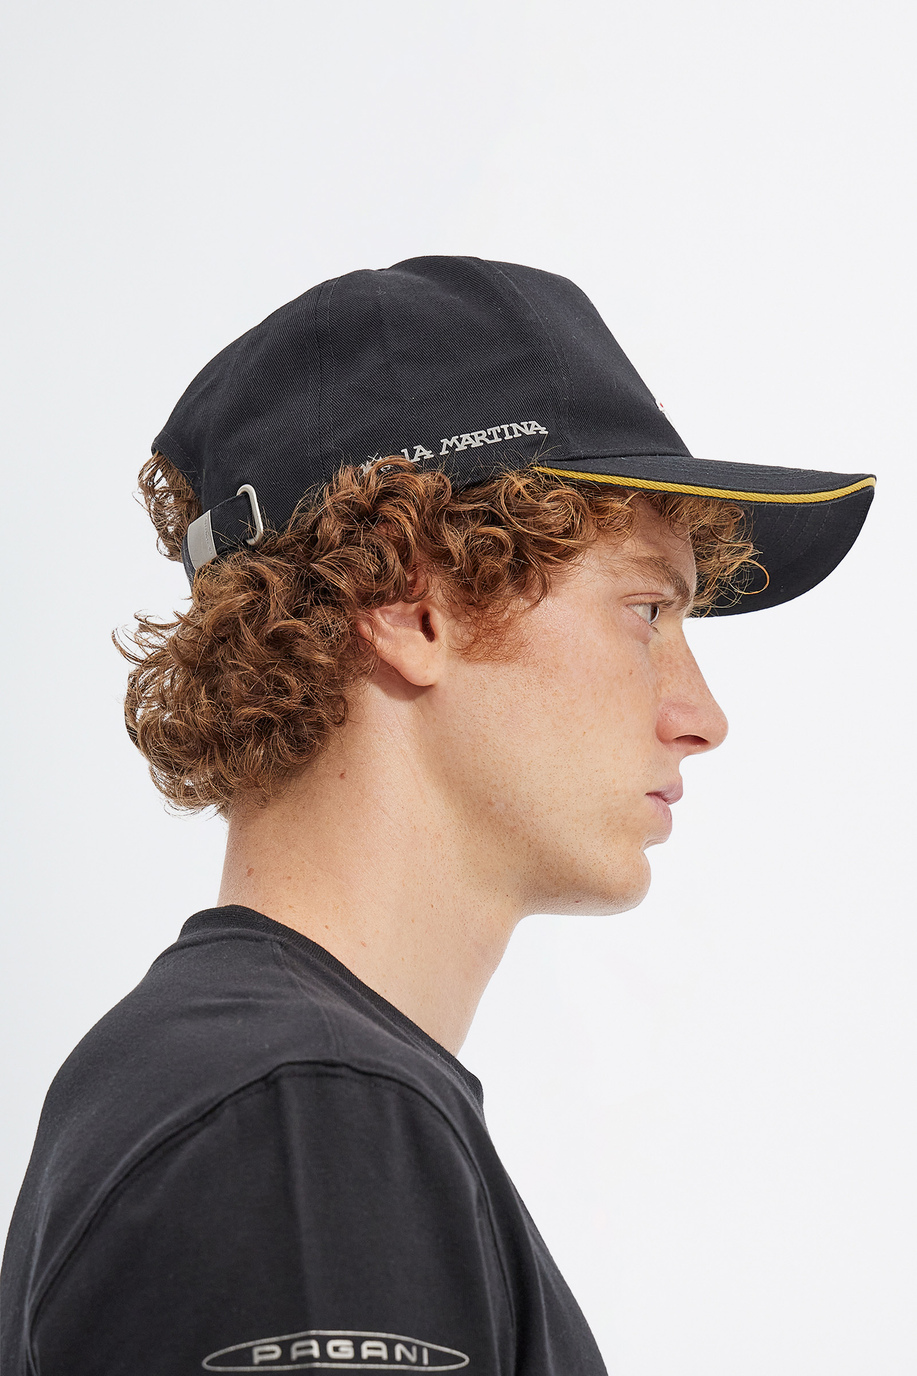 Pagani cap with visor - Gifts under €75 for him | La Martina - Official Online Shop